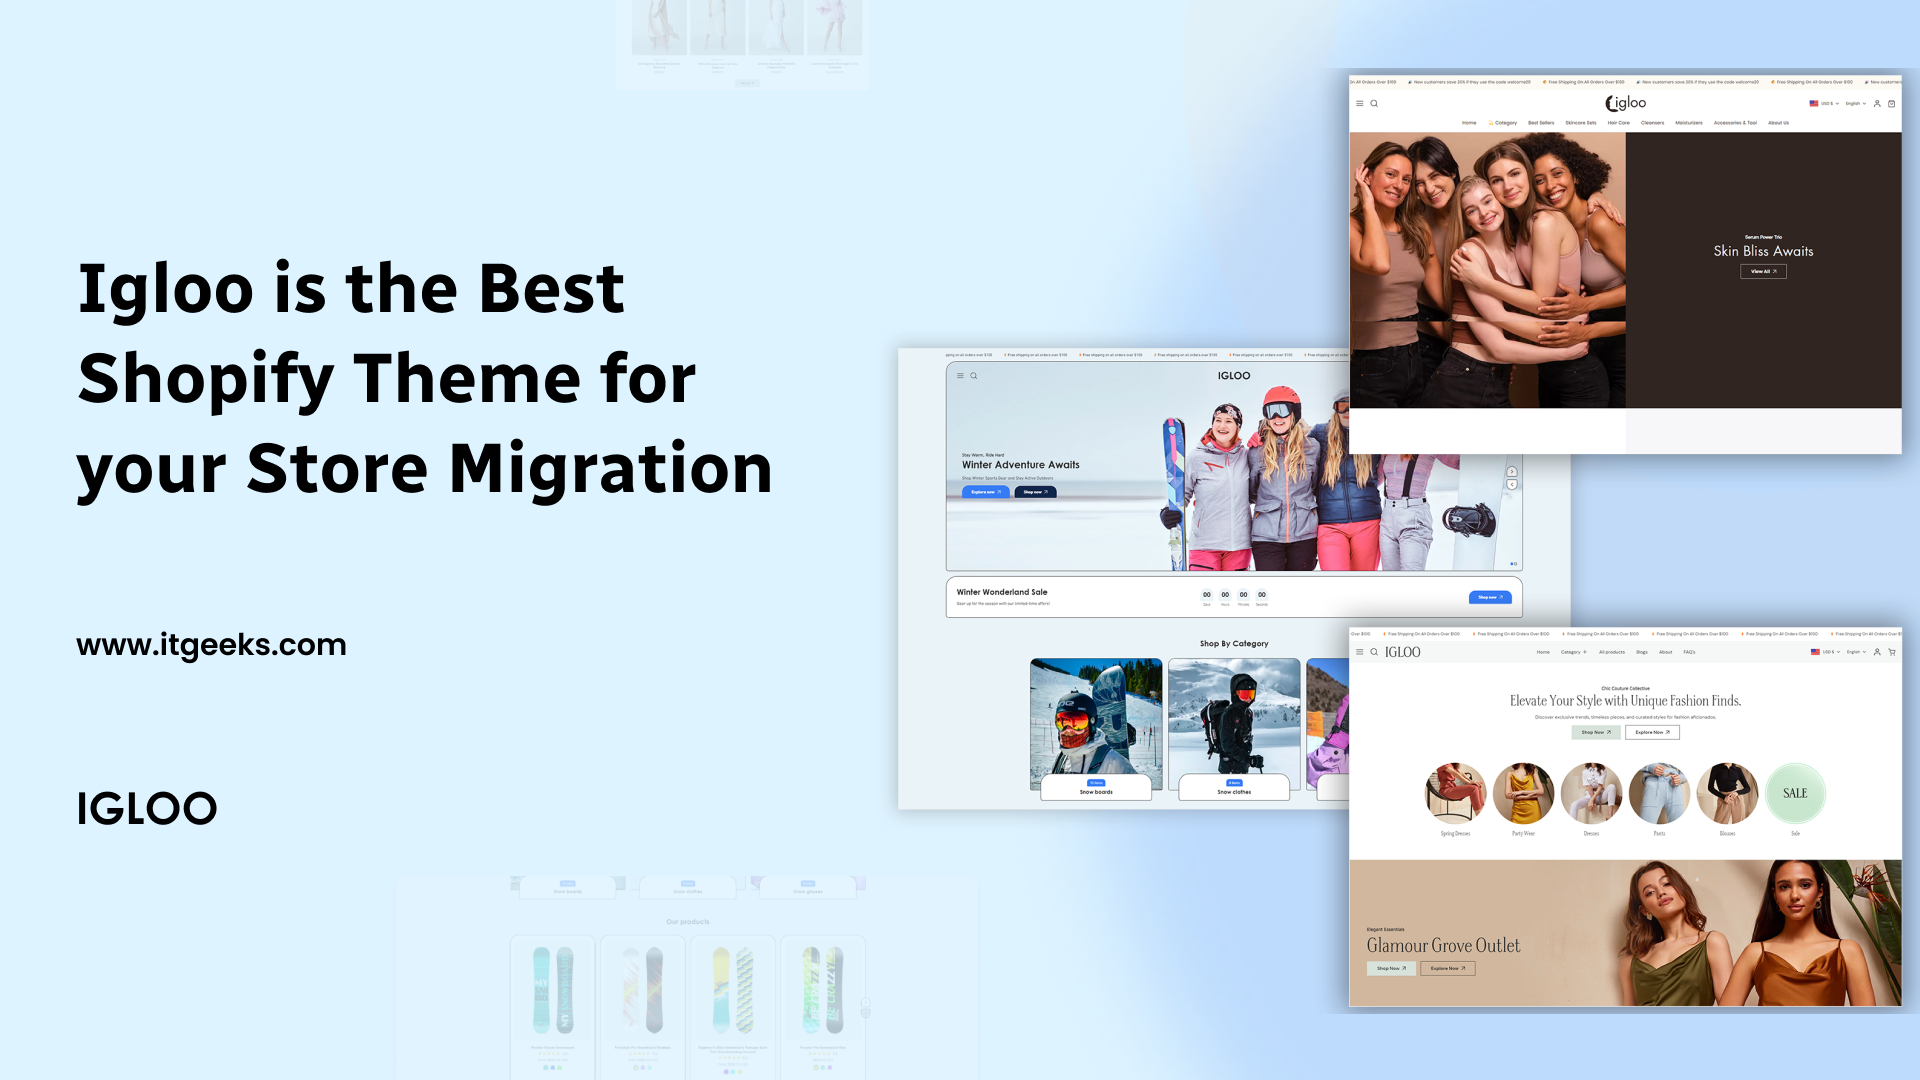 Igloo is the Best Shopify Theme for Your Store Migration